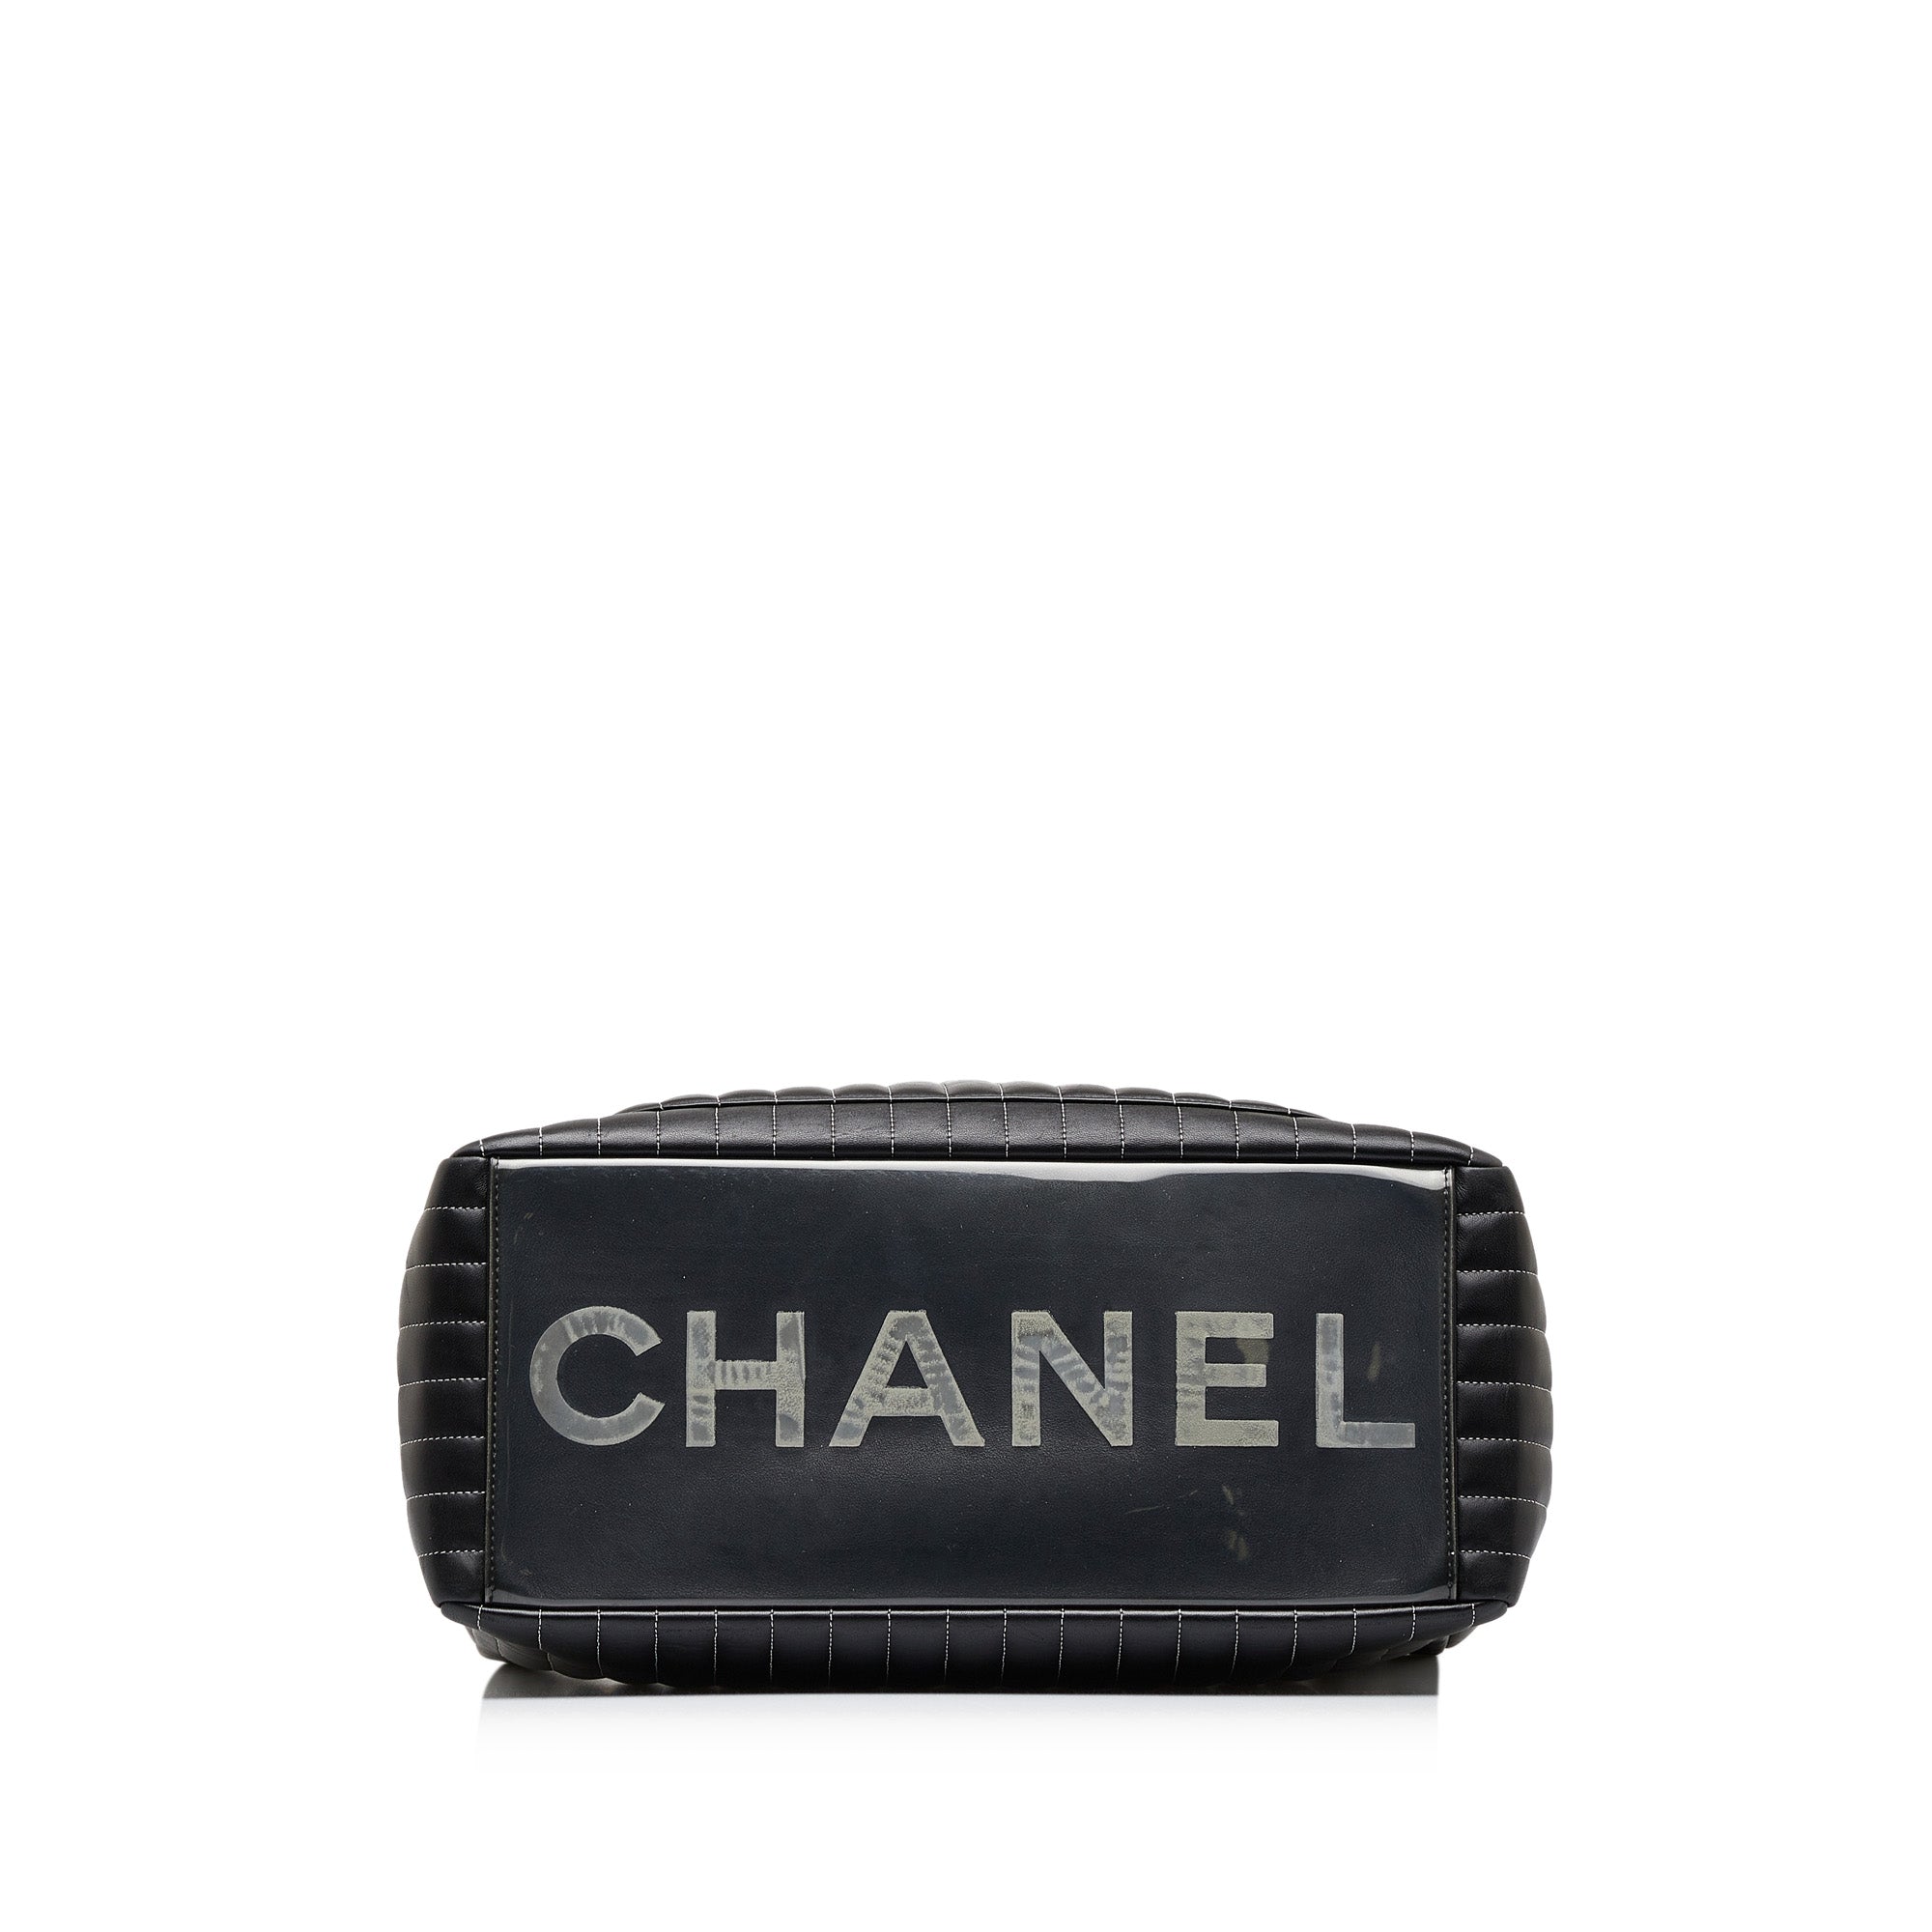 Chanel Bag VIP Gift Crossbody 100% original with certification